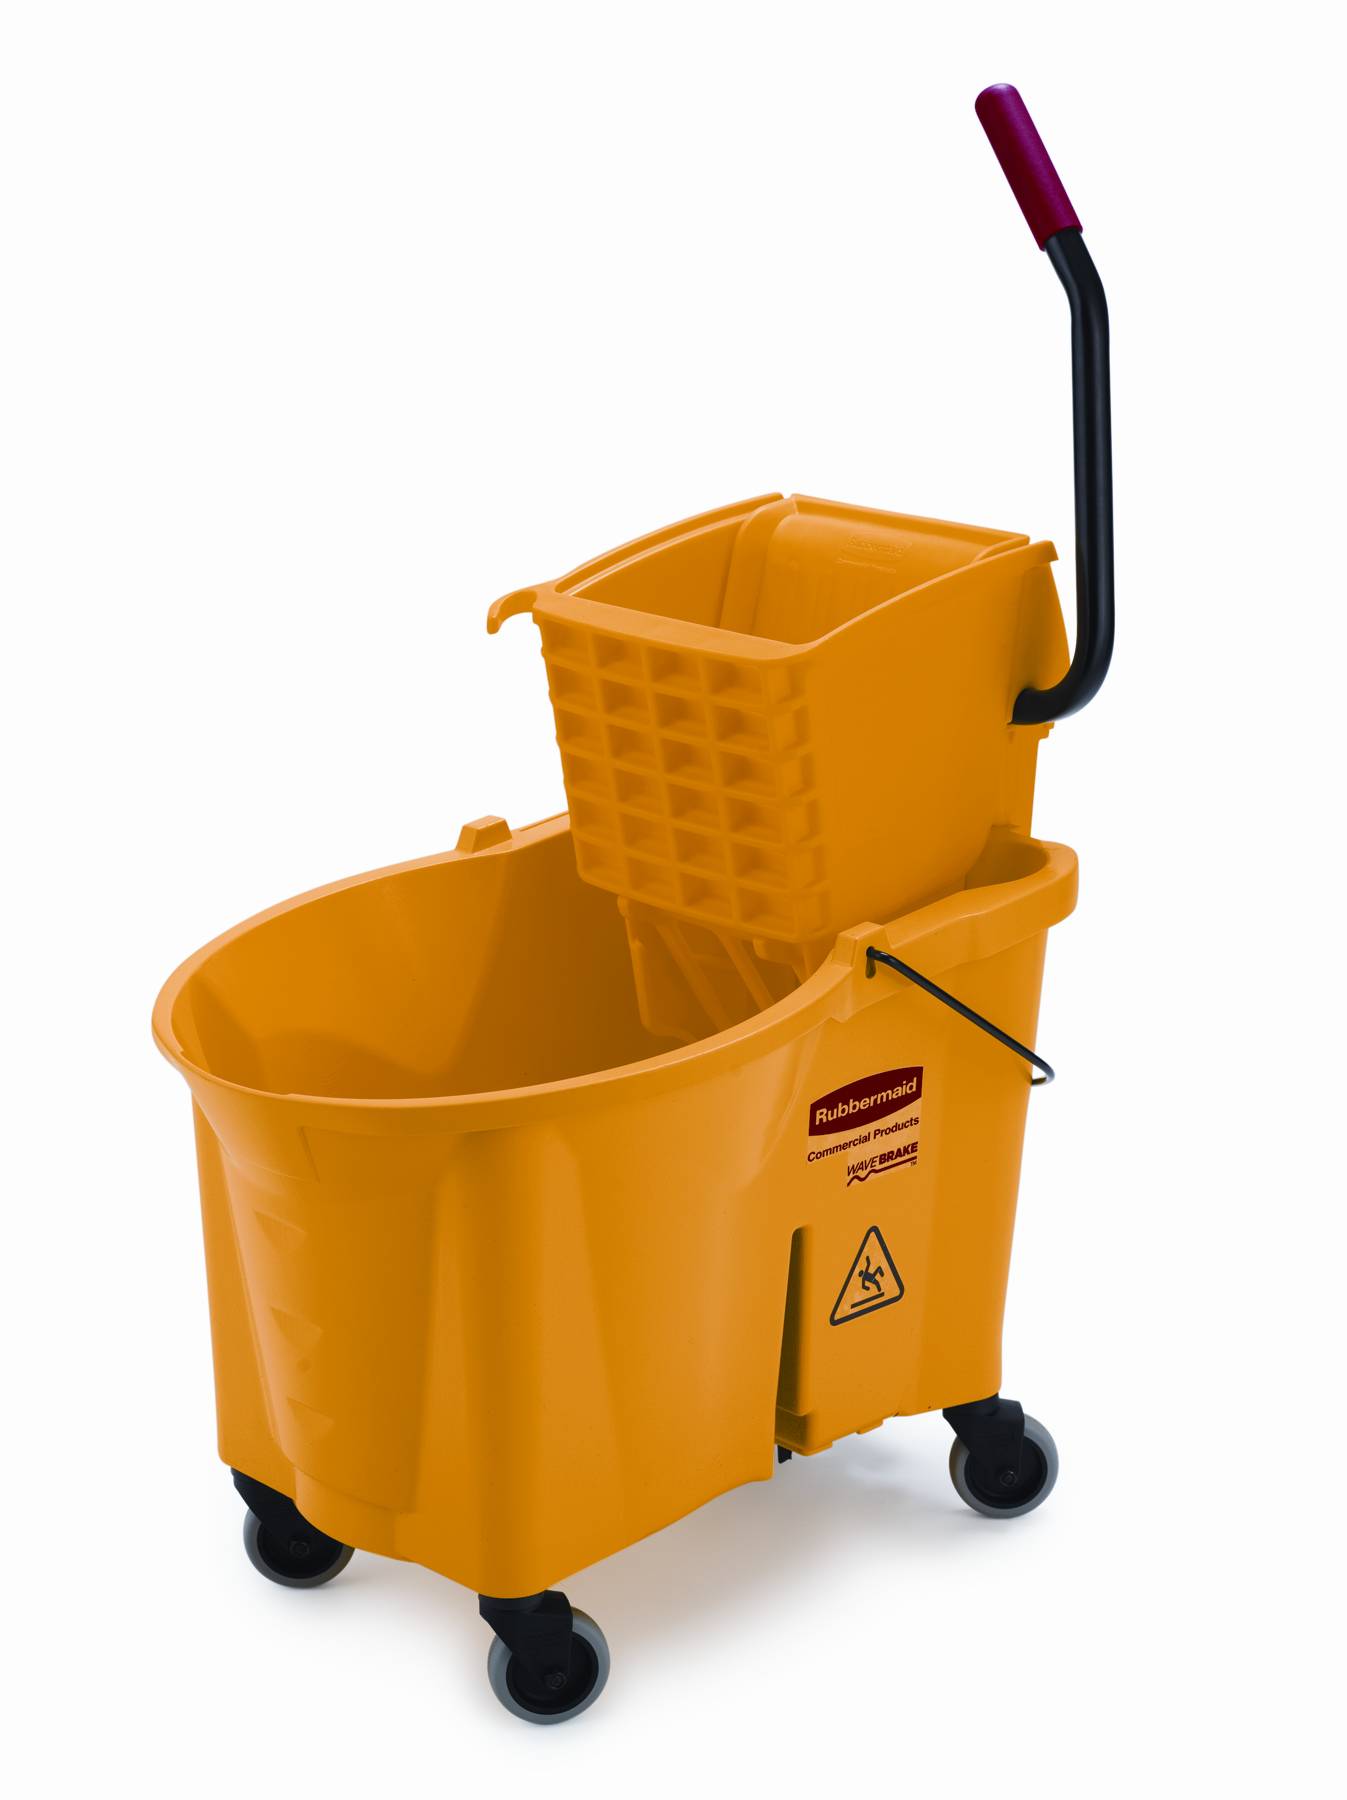 https://www.rubbermaidcommercialproducts.com/wp-images/product/detail/6186-88-Wavebreak-Mopping.jpg